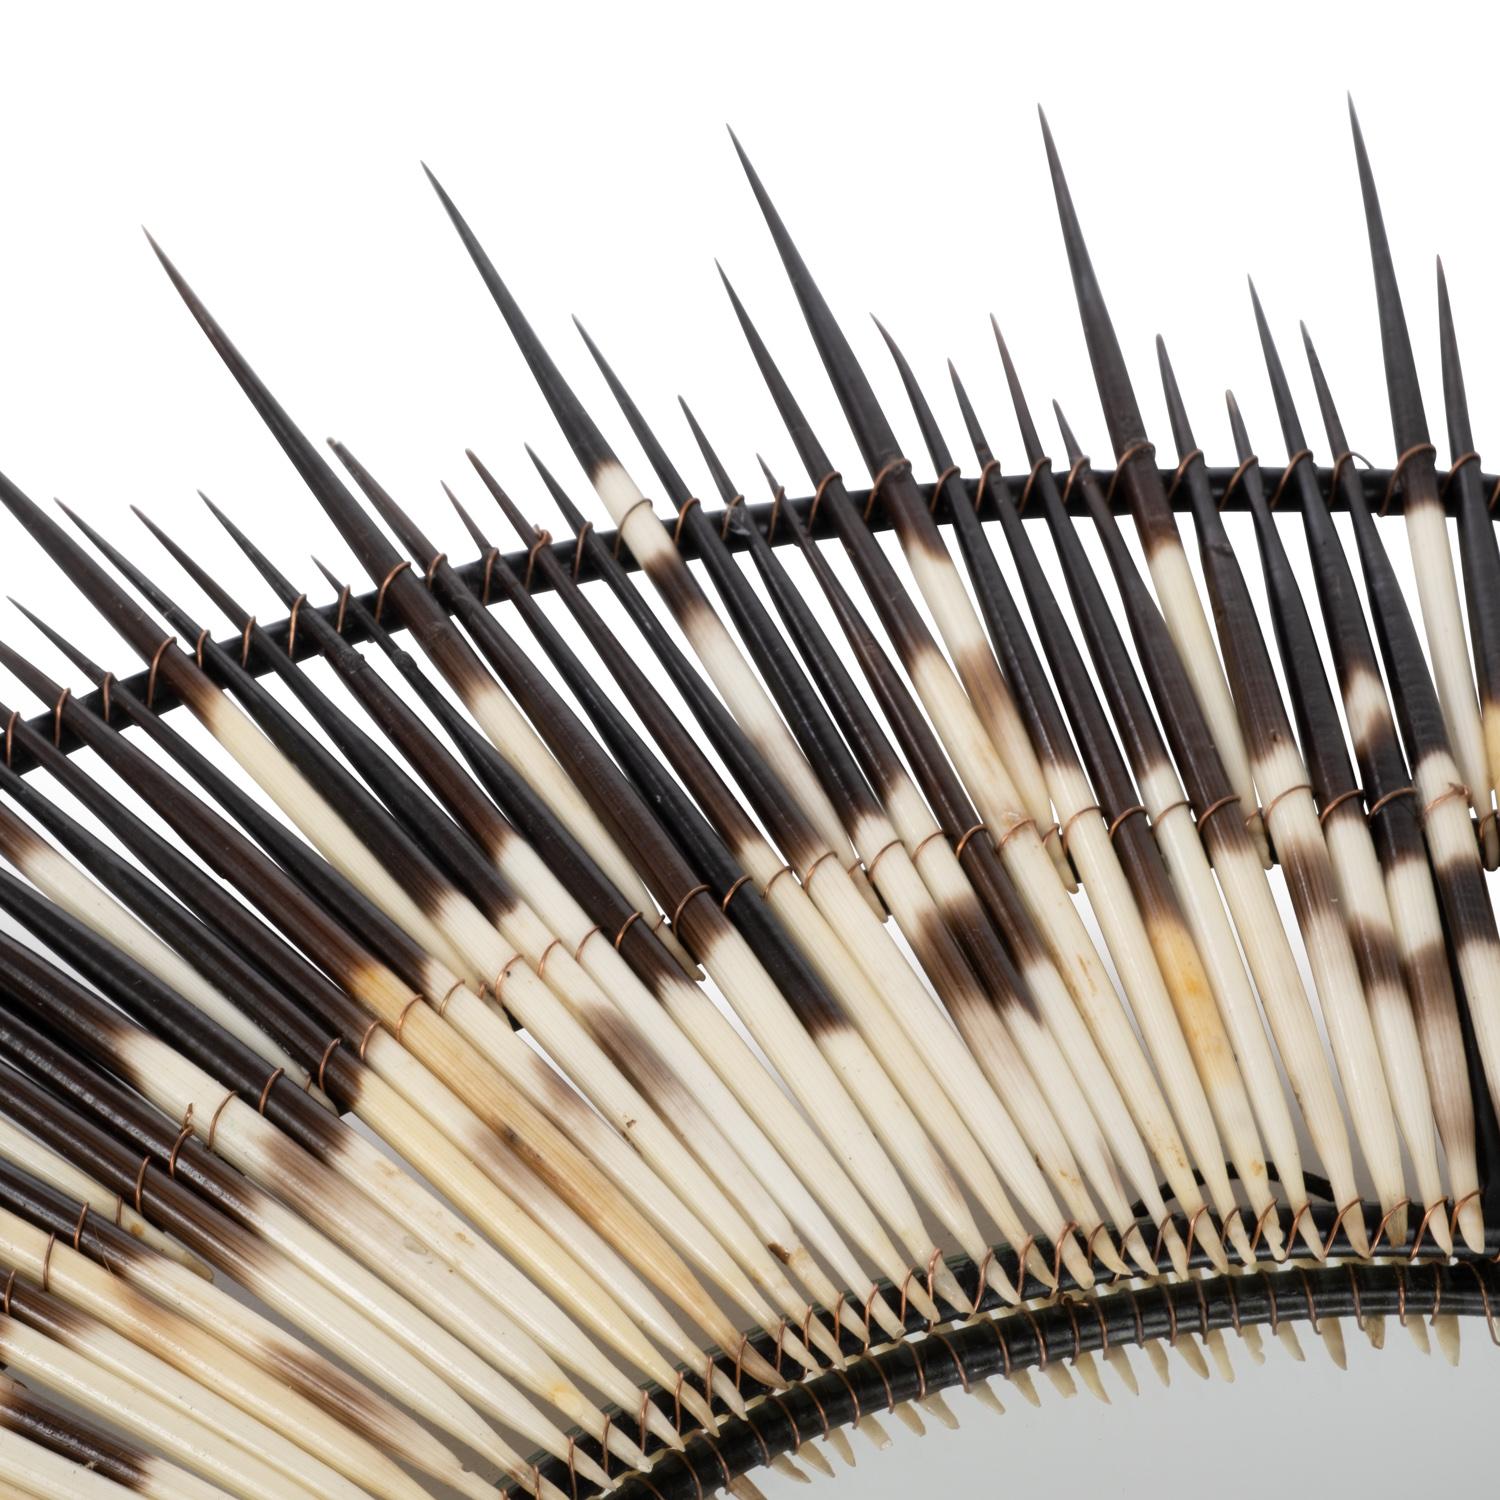 Porcupine Quill Round Mirror - Small